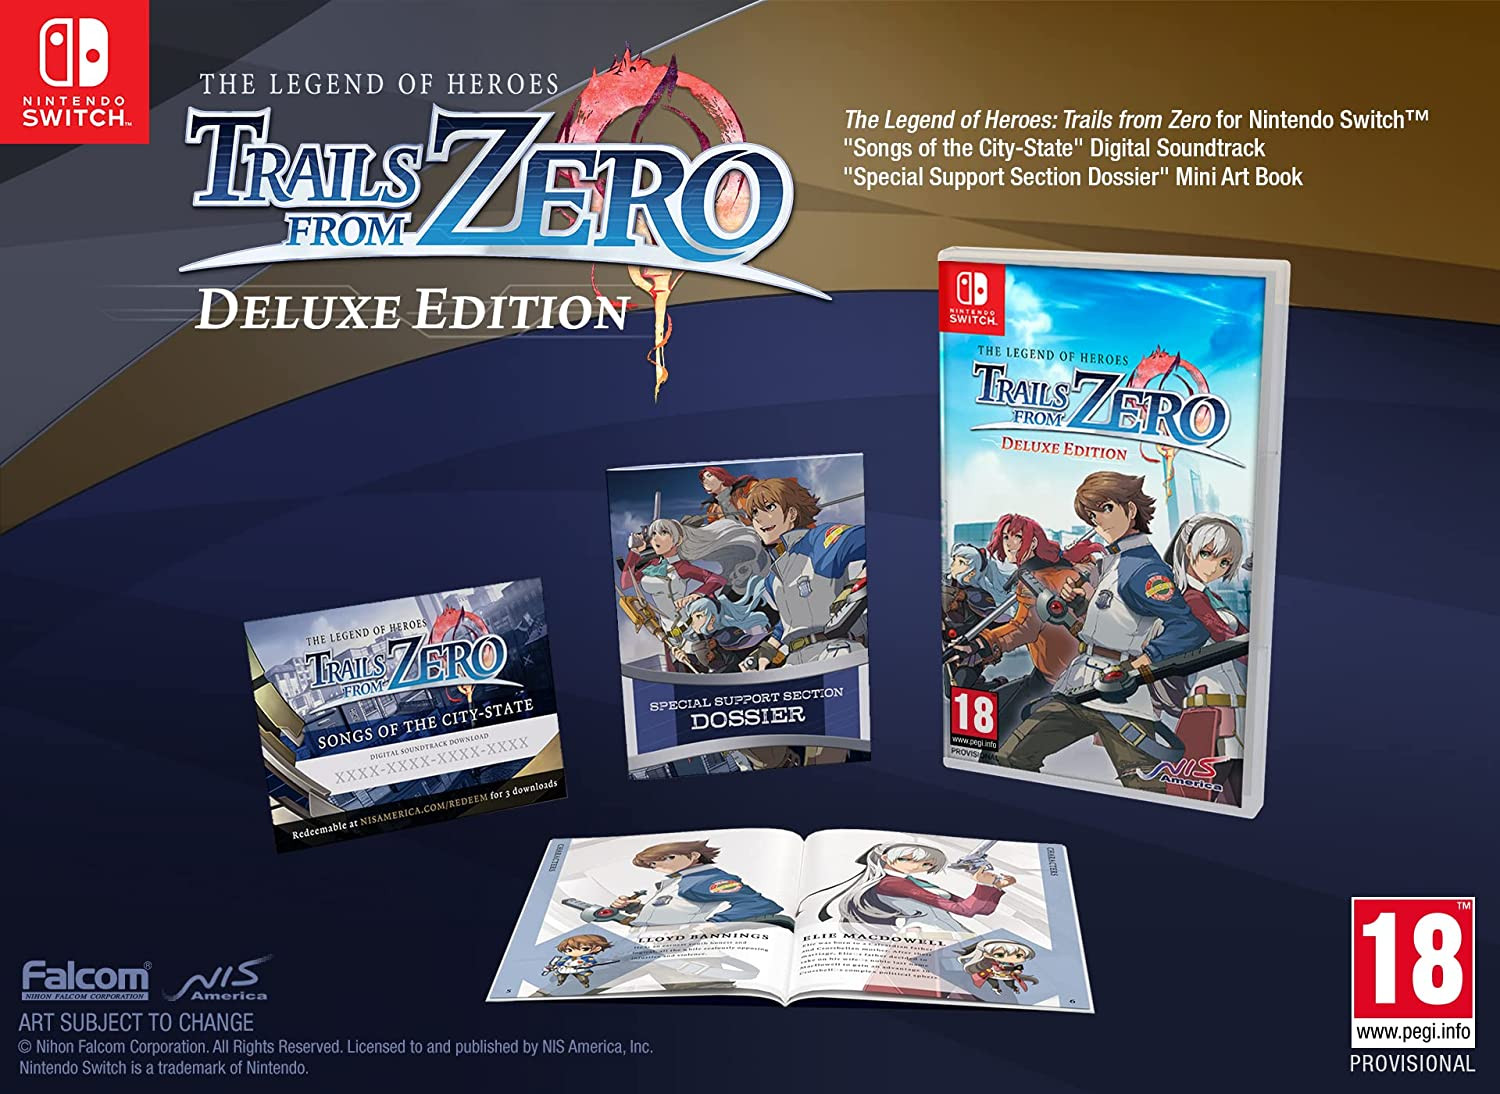 The Legend of Heroes Trails from Zero Deluxe Edition